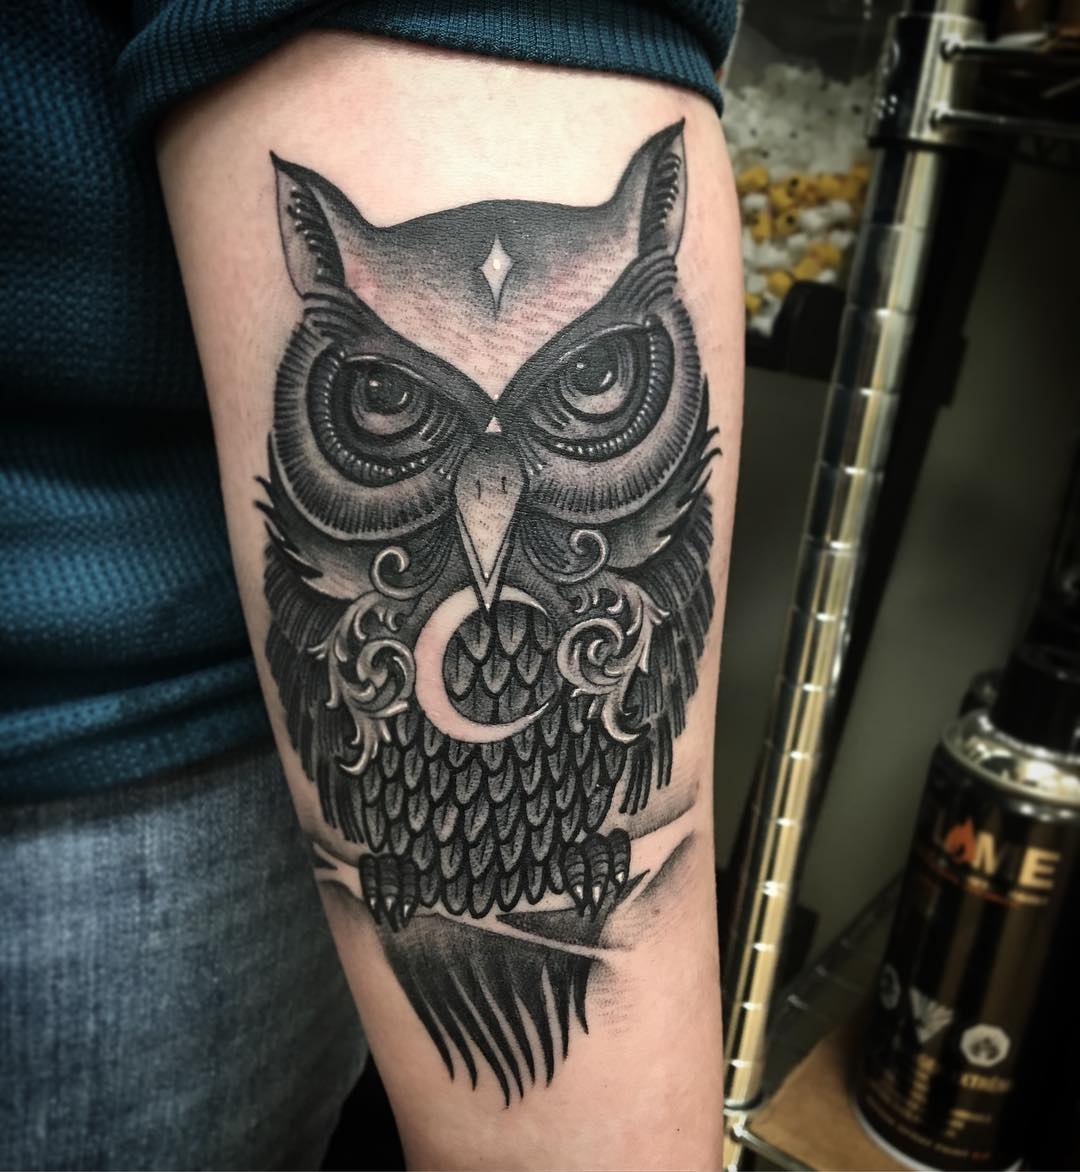 55 High Recommended Owl Tattoo Design And Ideas - Blurmark